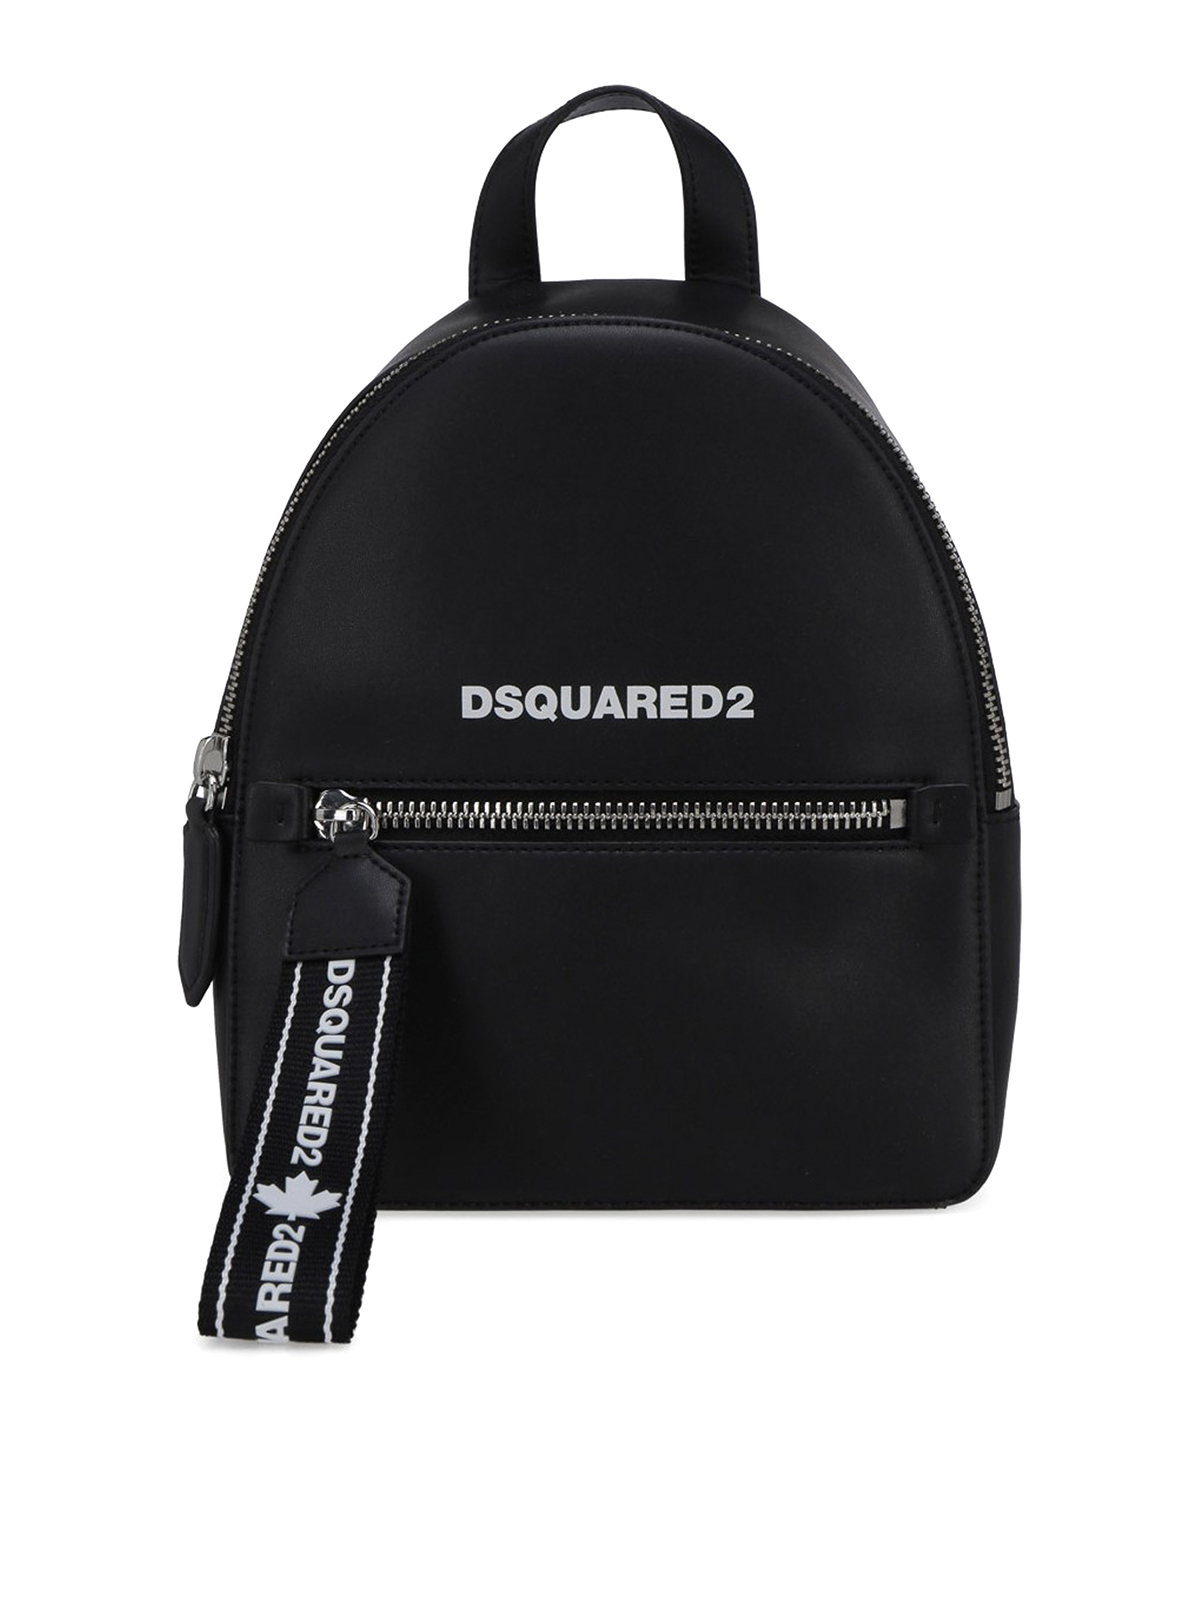 Dsquared2 LEATHER BACKPACK